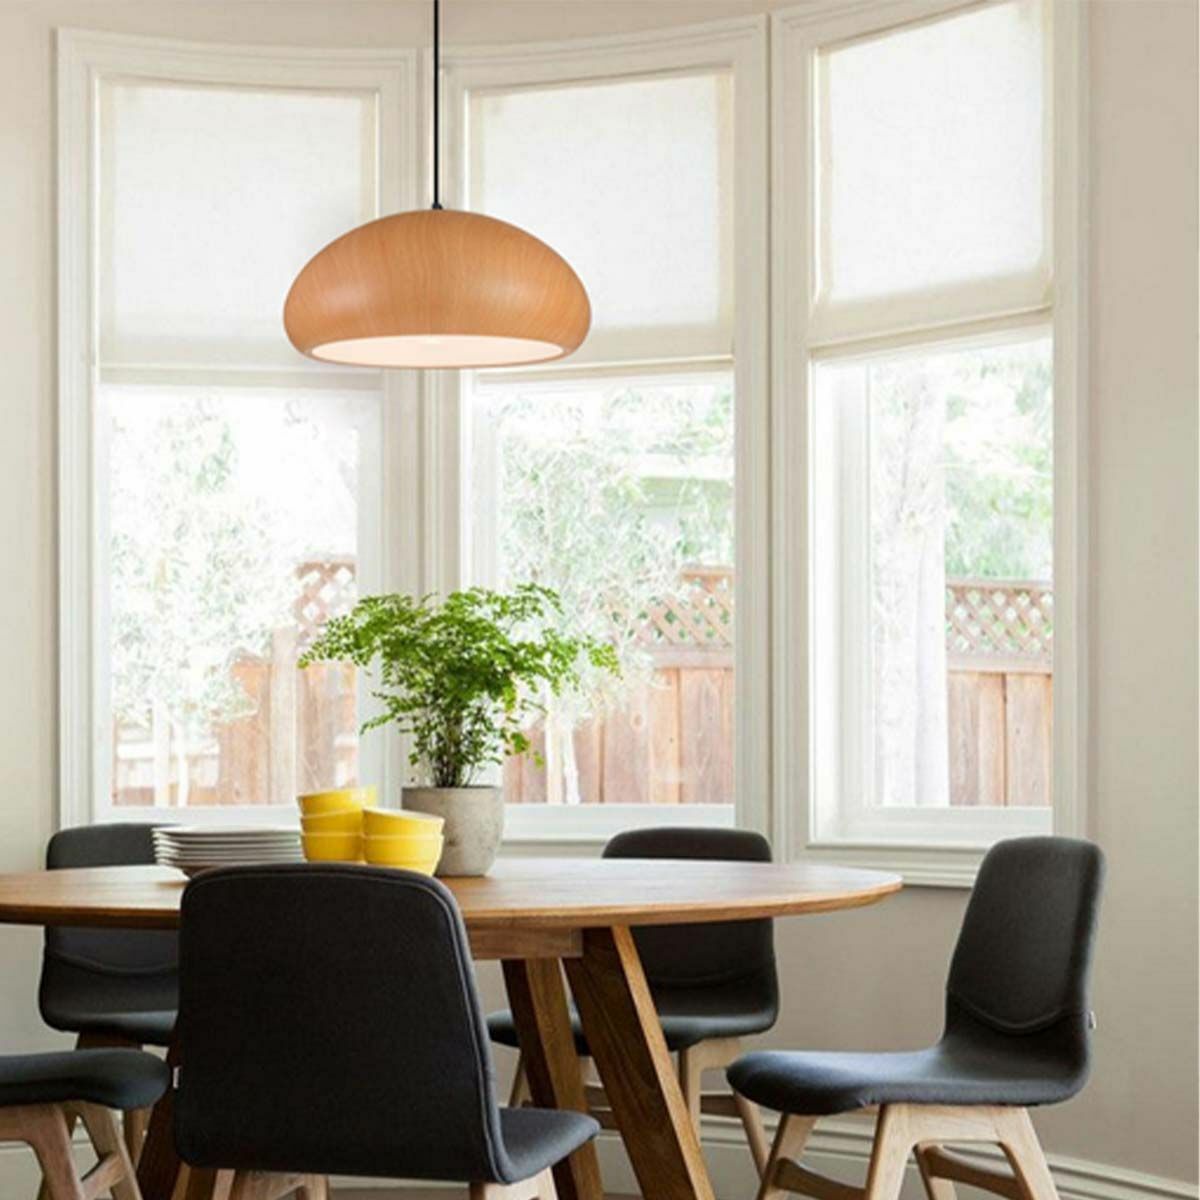 Ligna Dome Timber Style Pendant